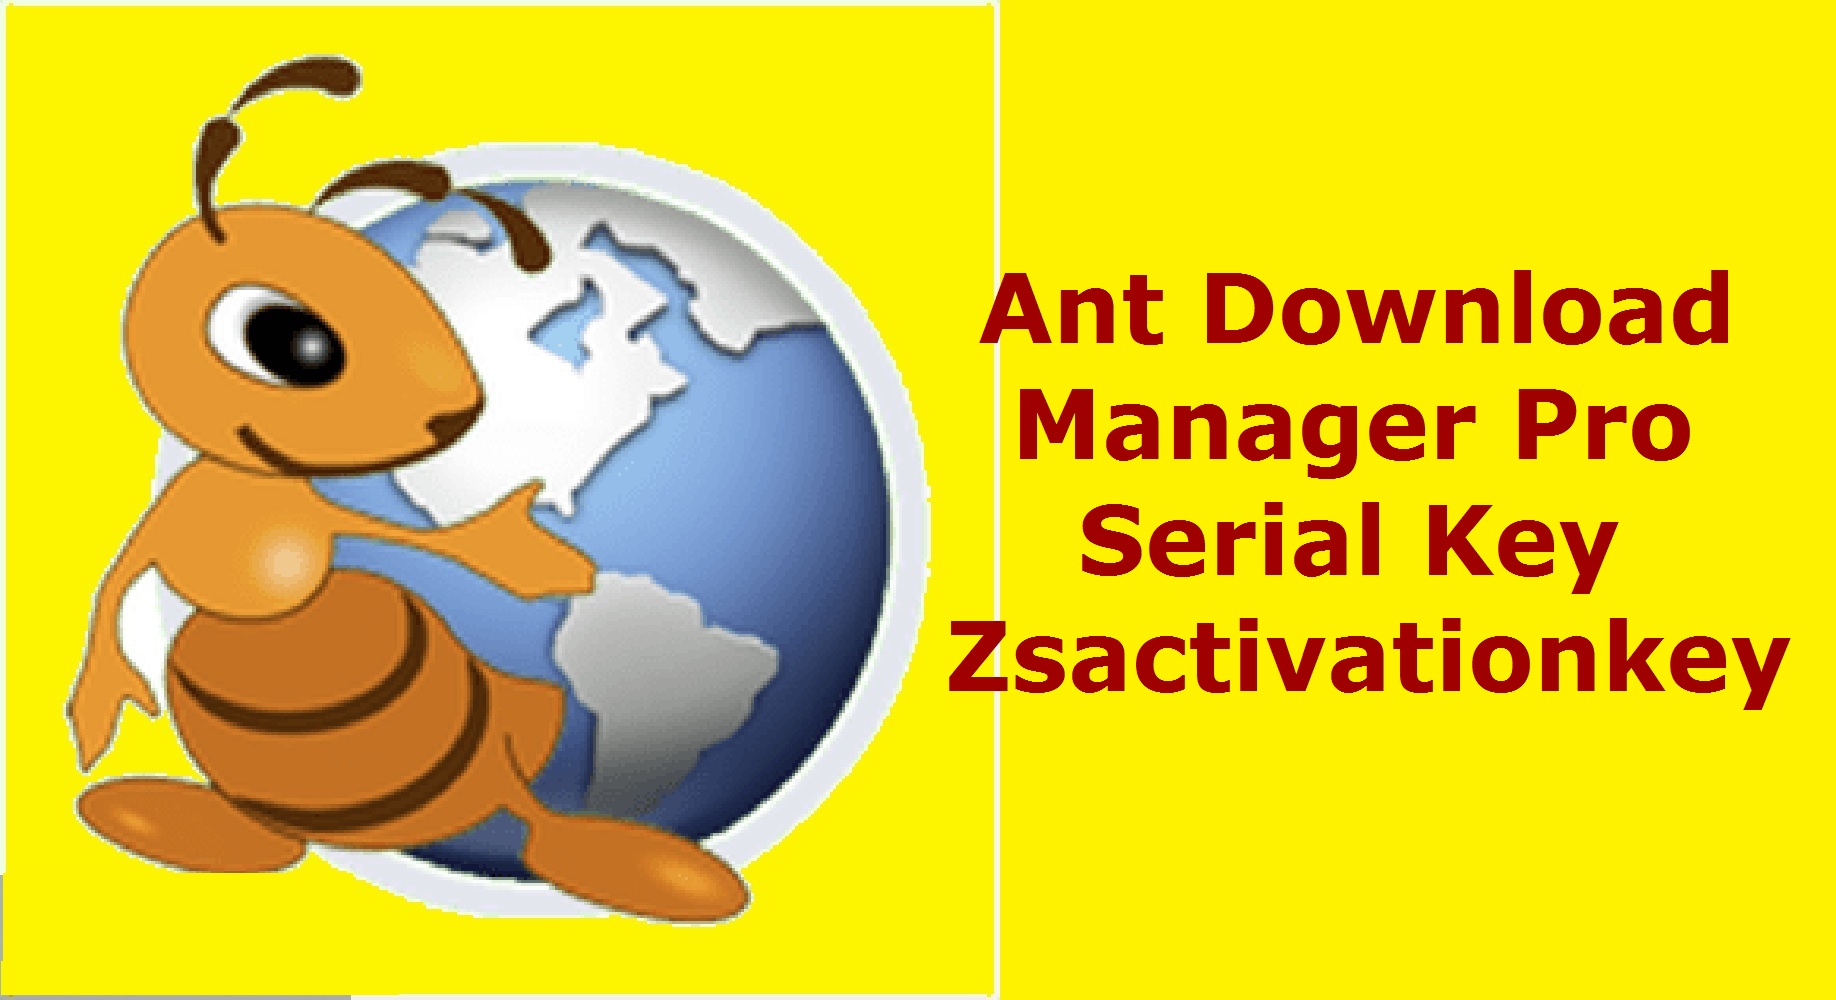 Ant Download Manager Serial Key